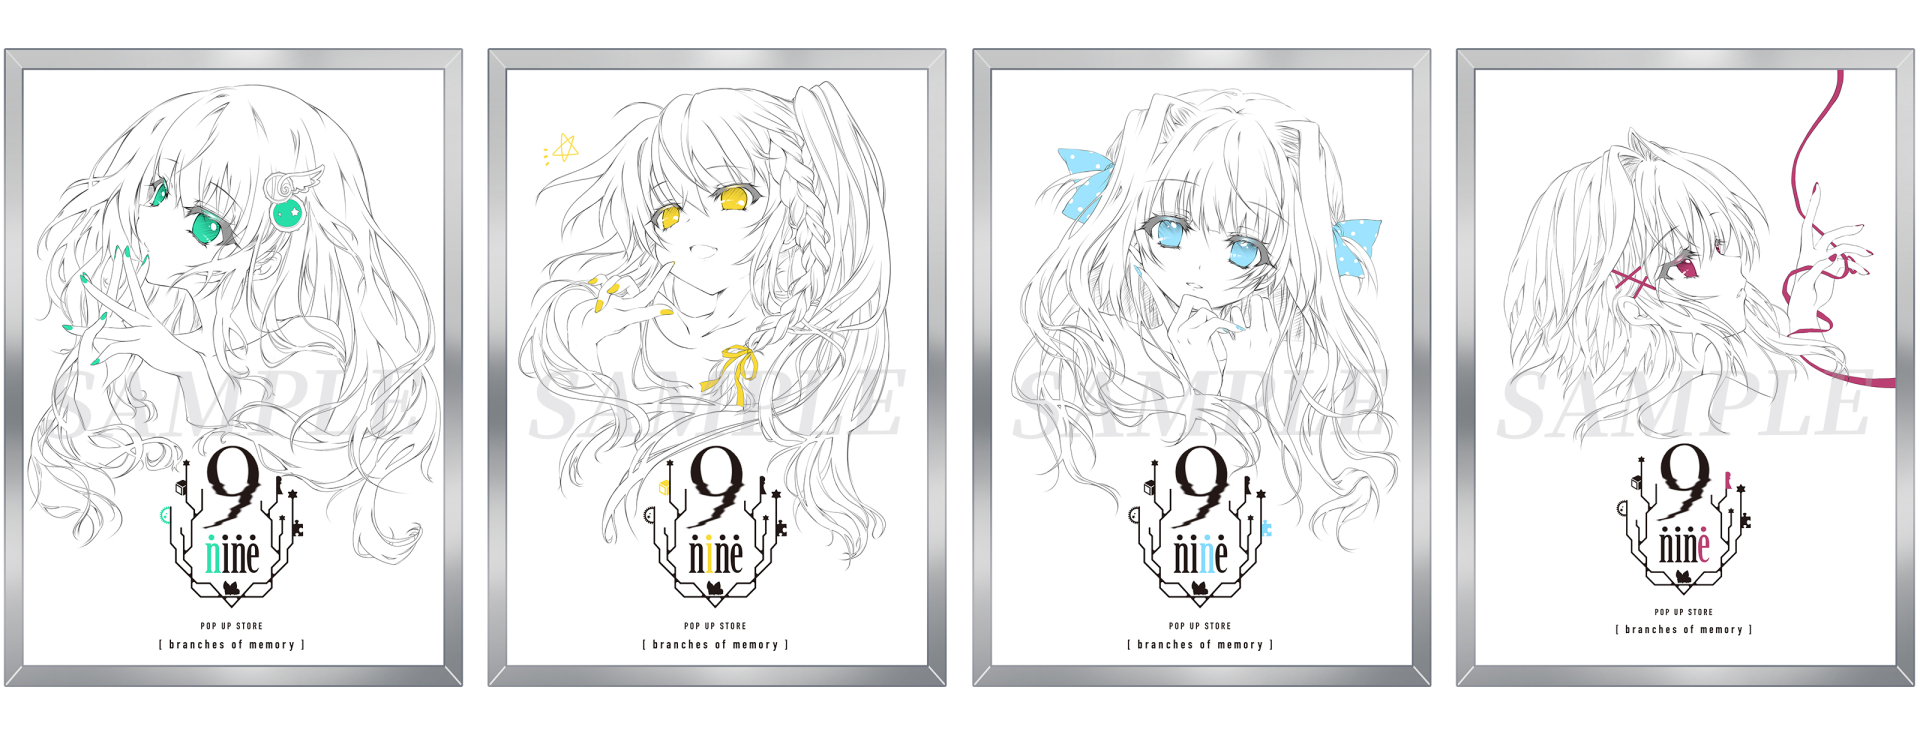 9-nine- POP UP STORE 【branches of memory】販売グッズ紹介